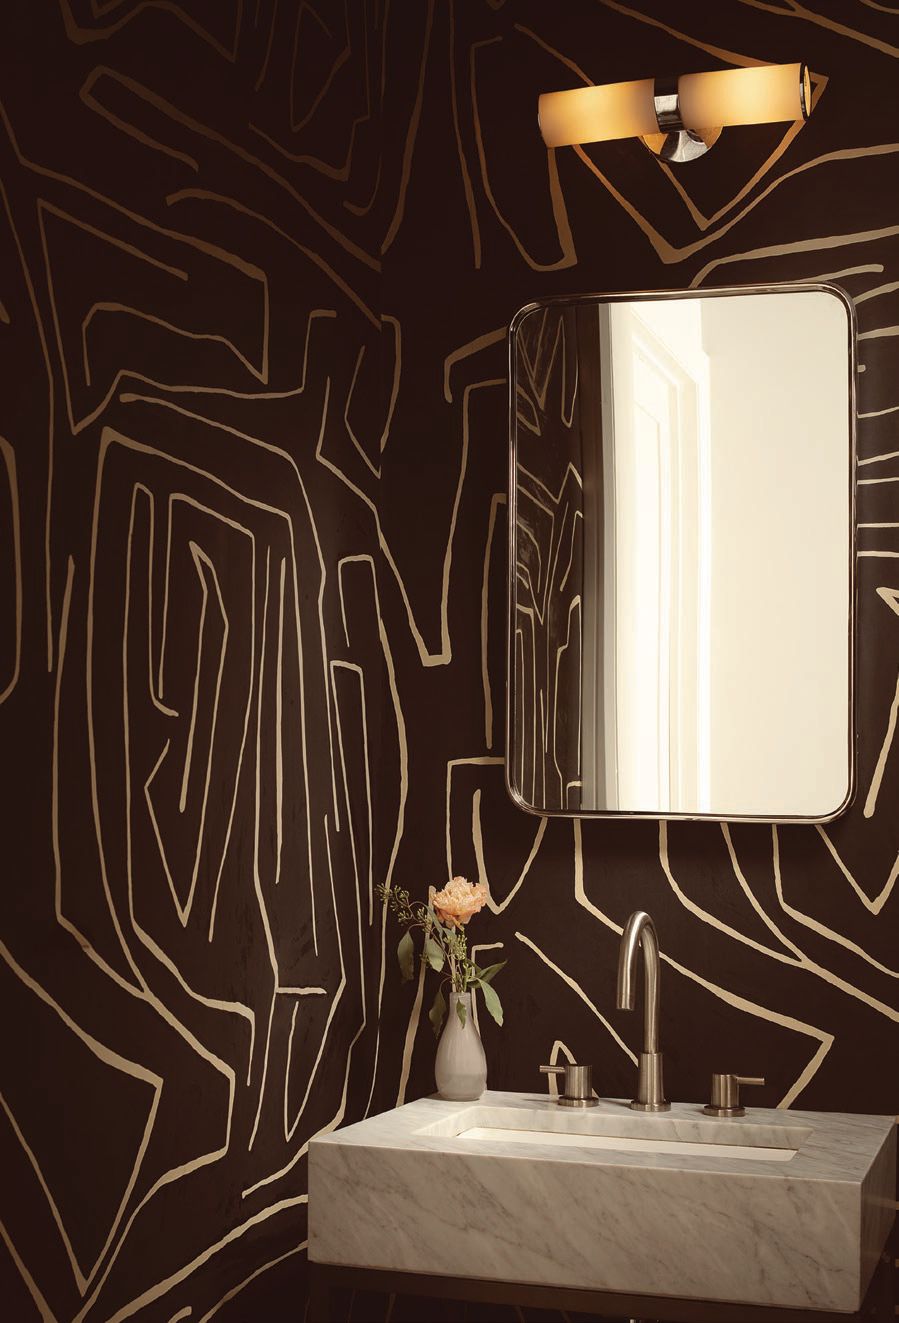 A powder room features an eccentric wall covering. PHOTO COURTESY OF ATRA